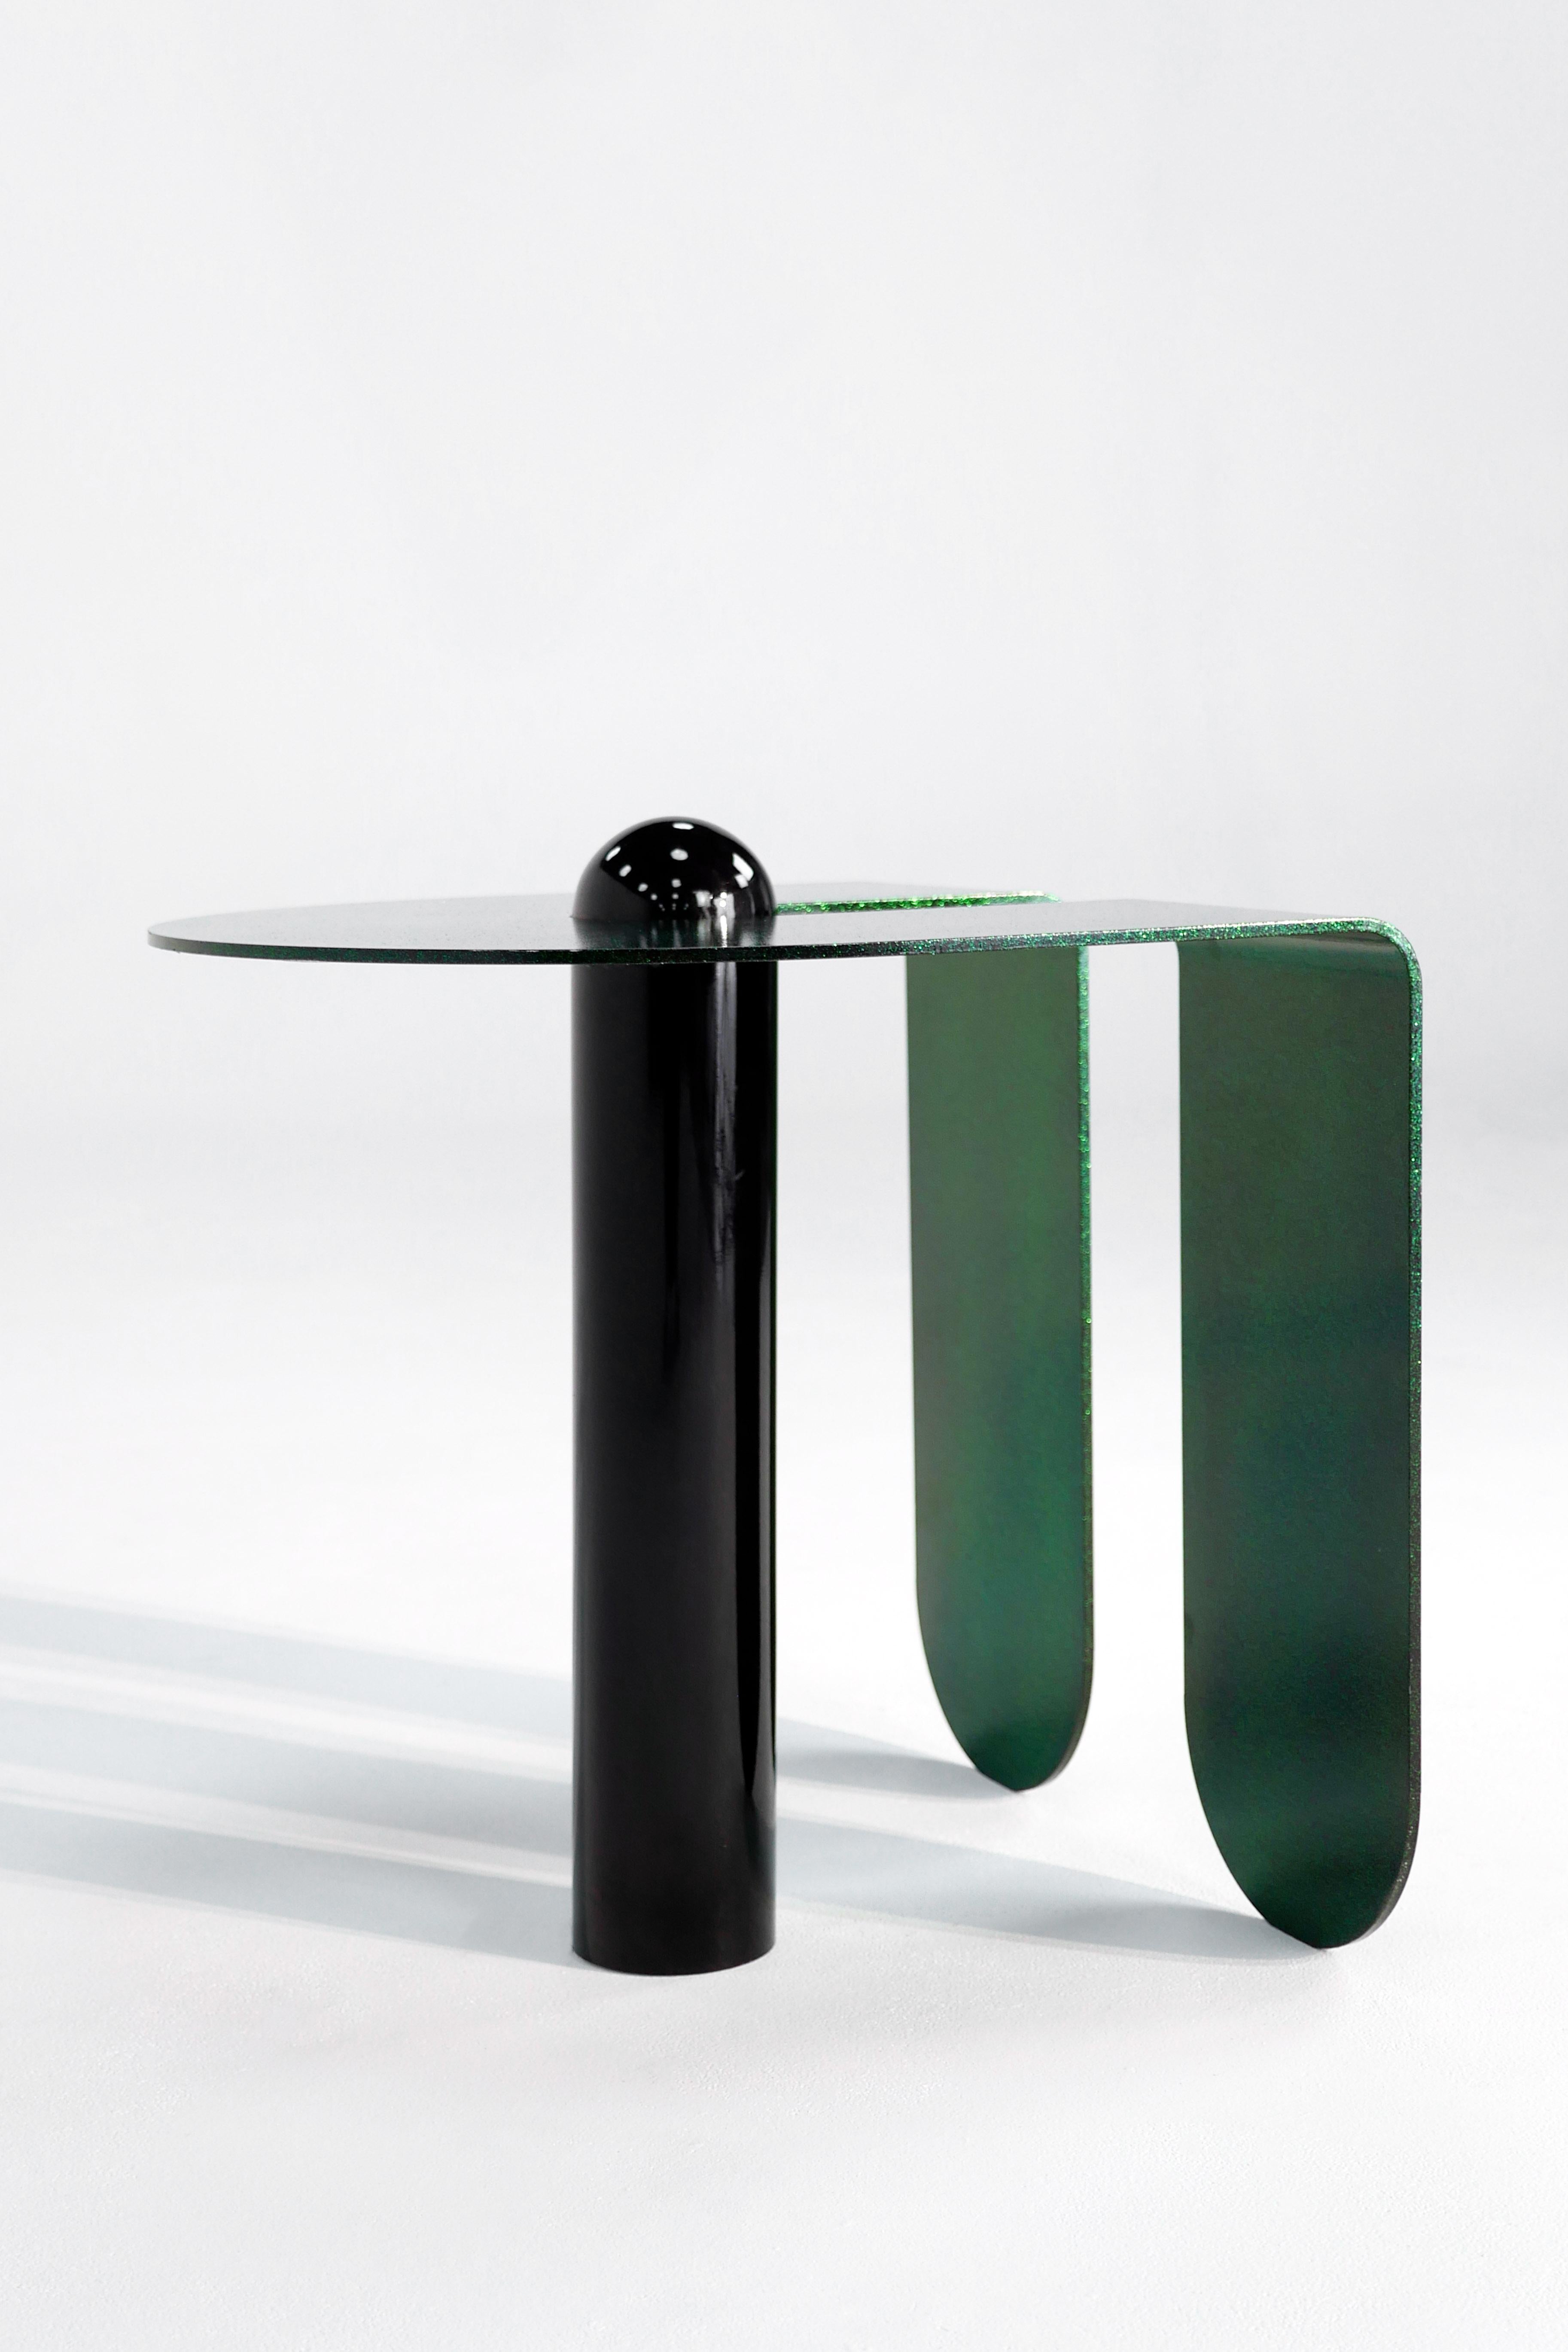 Juxtaposing highly distilled forms with sensuous curves, the U & I side table is both playful and elegantly simple. Powder-coated in a sparkling, three-dimensional candied glaze. 

Custom colors available upon request.